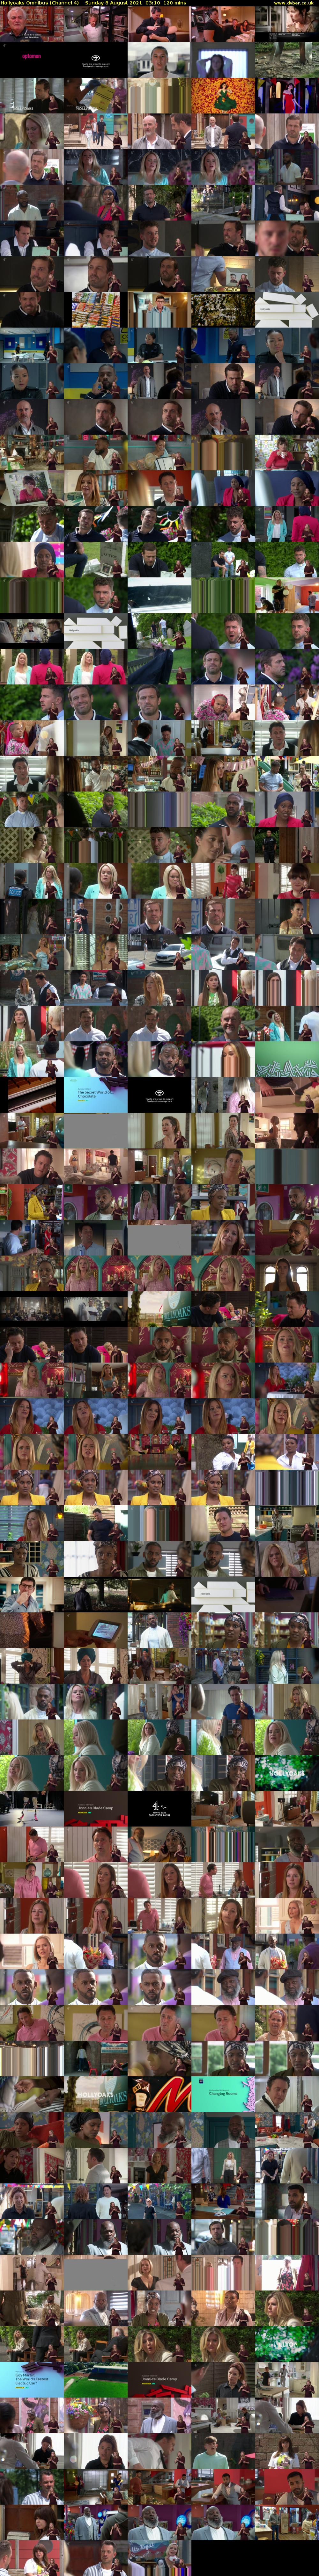 Hollyoaks Omnibus (Channel 4) Sunday 8 August 2021 03:10 - 05:10